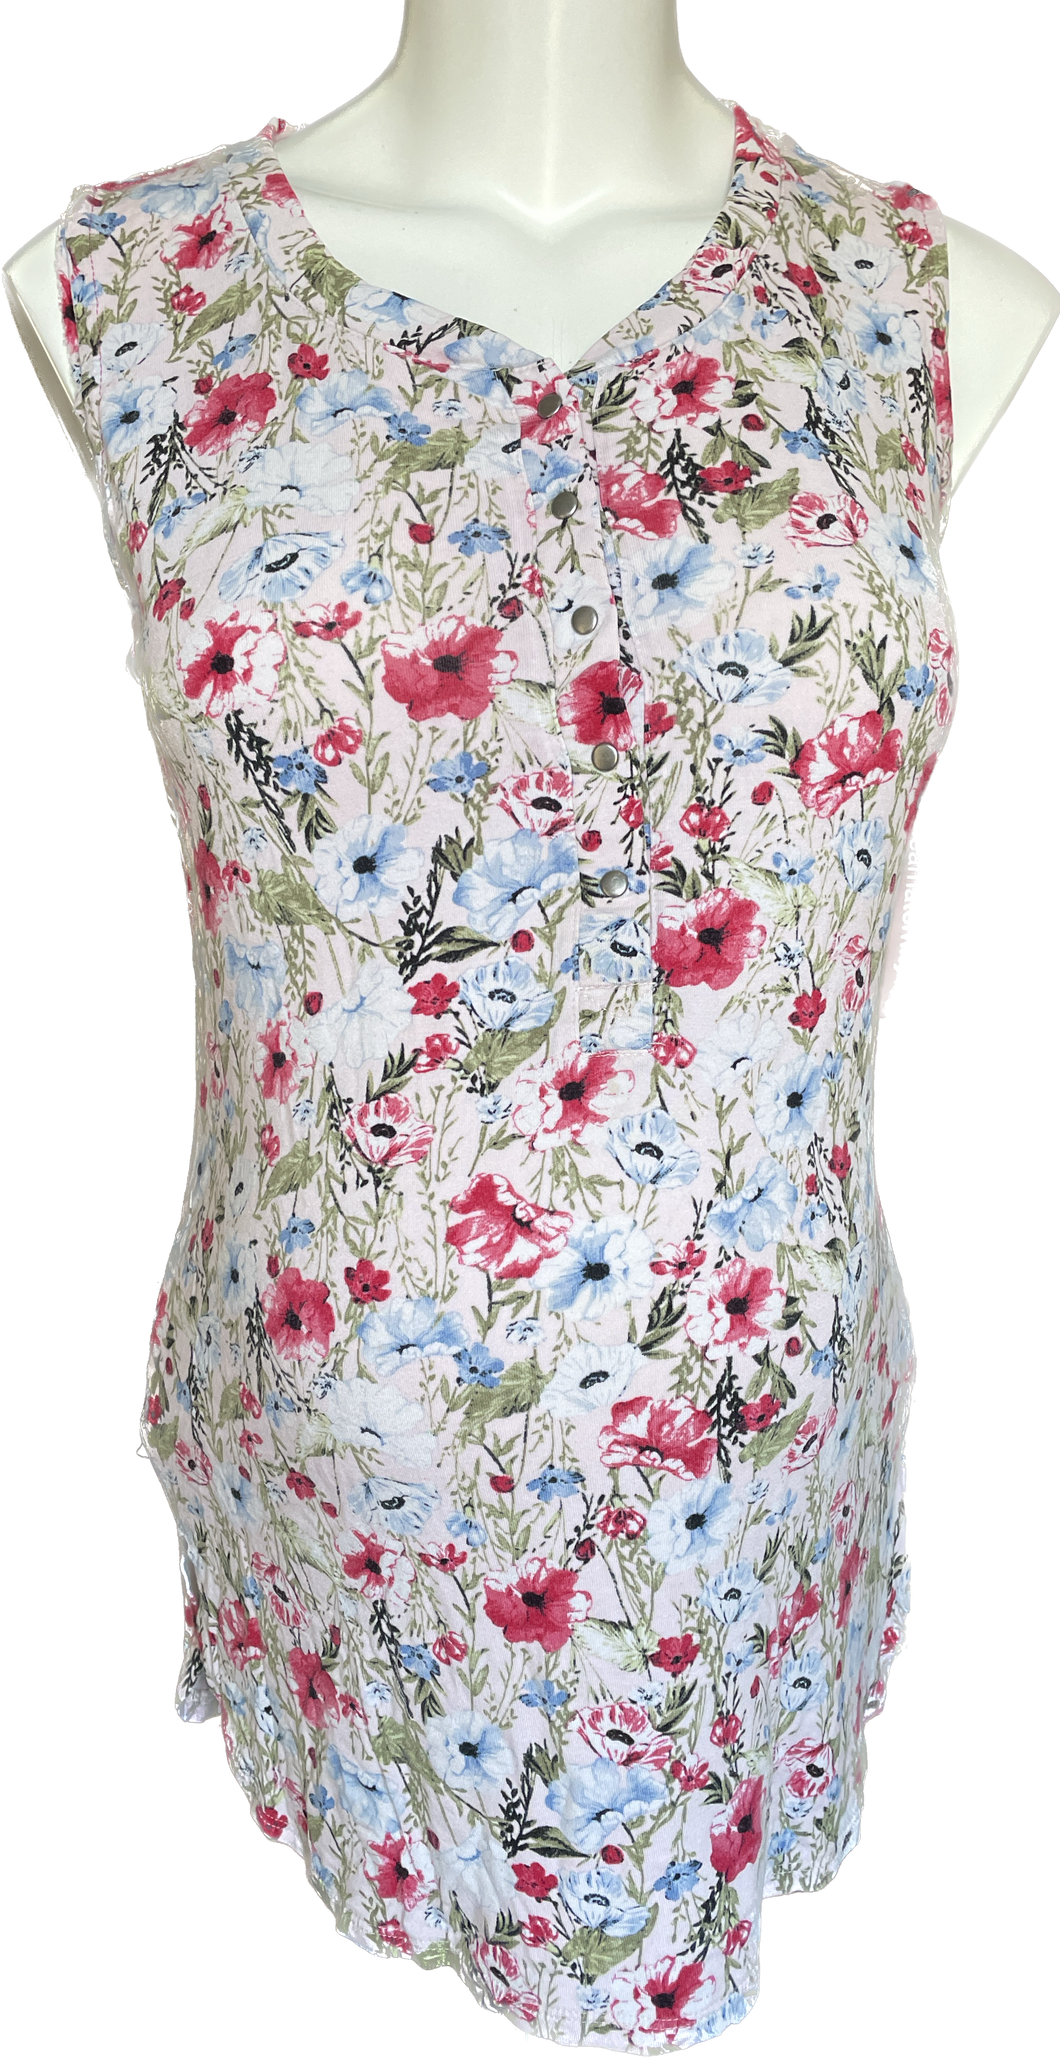 S Thyme Maternity Pink Floral Feeding Top